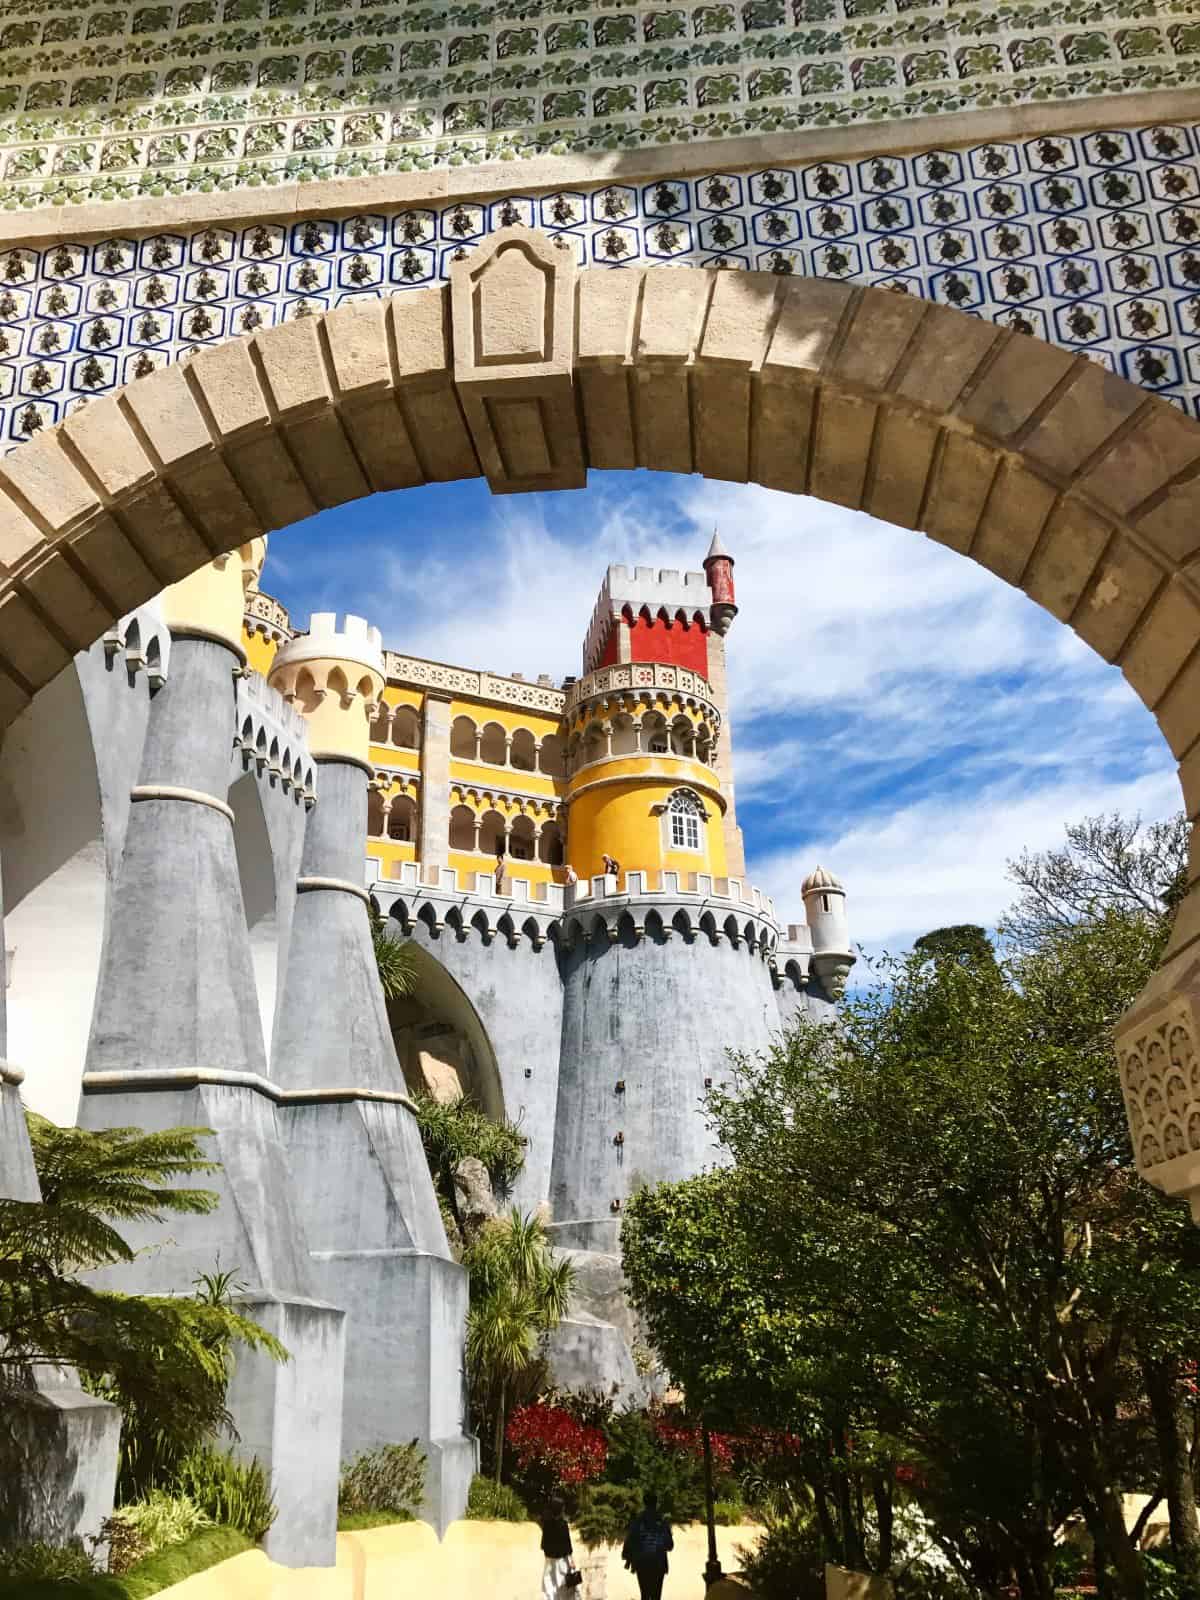 Itinerary ideas for Lisbon, Portugal - Sintra makes an amazing day trip